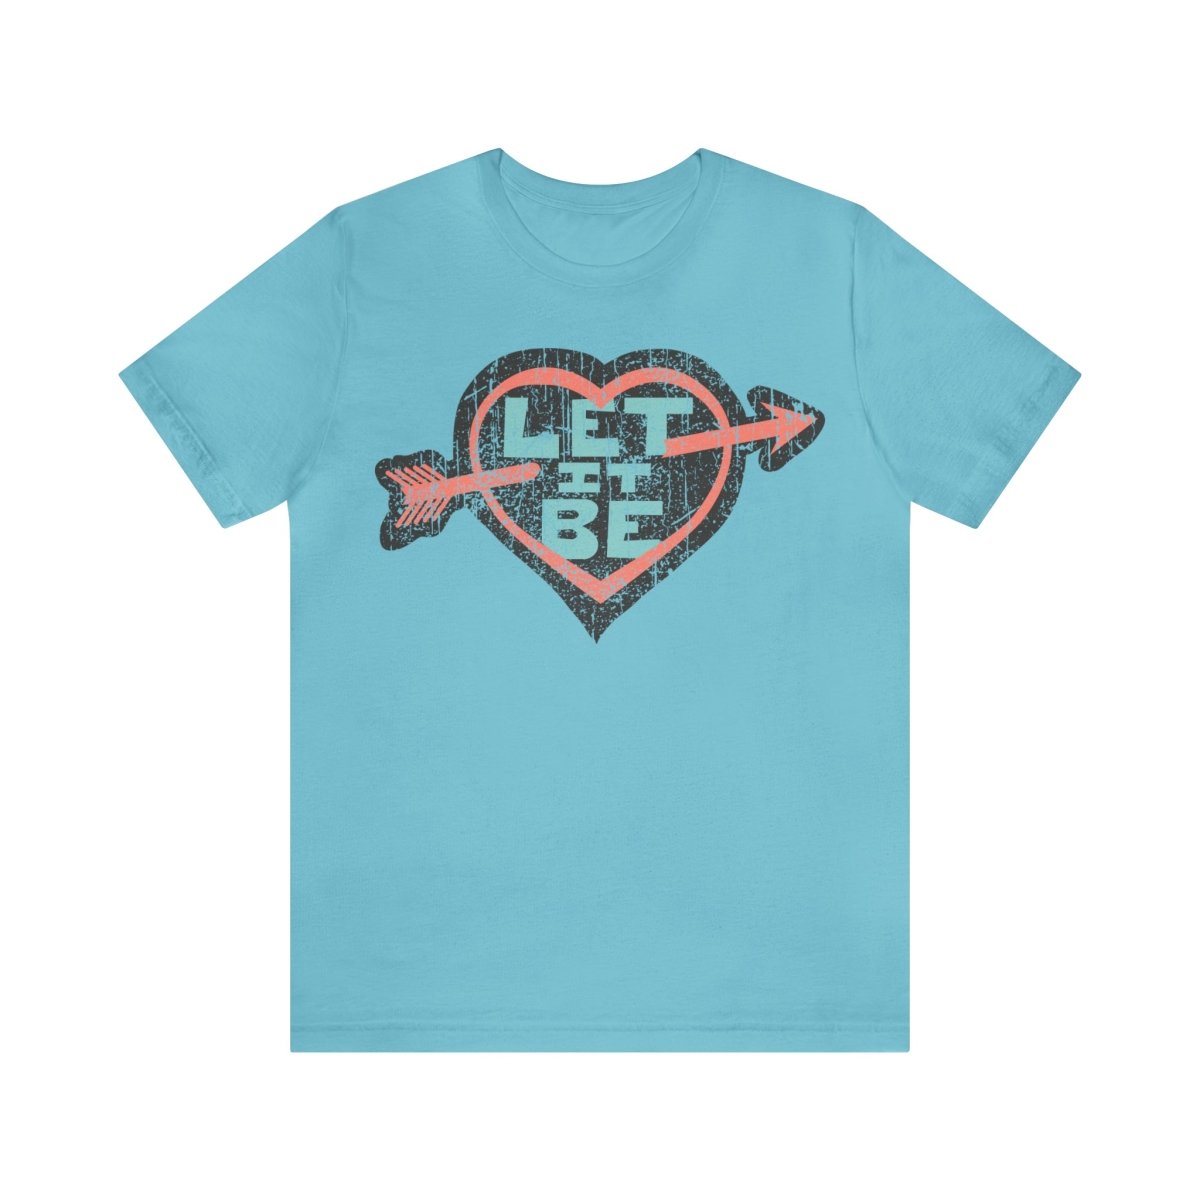 Let It Be Premium T-Shirt, Vintage Wisdom For All Gift